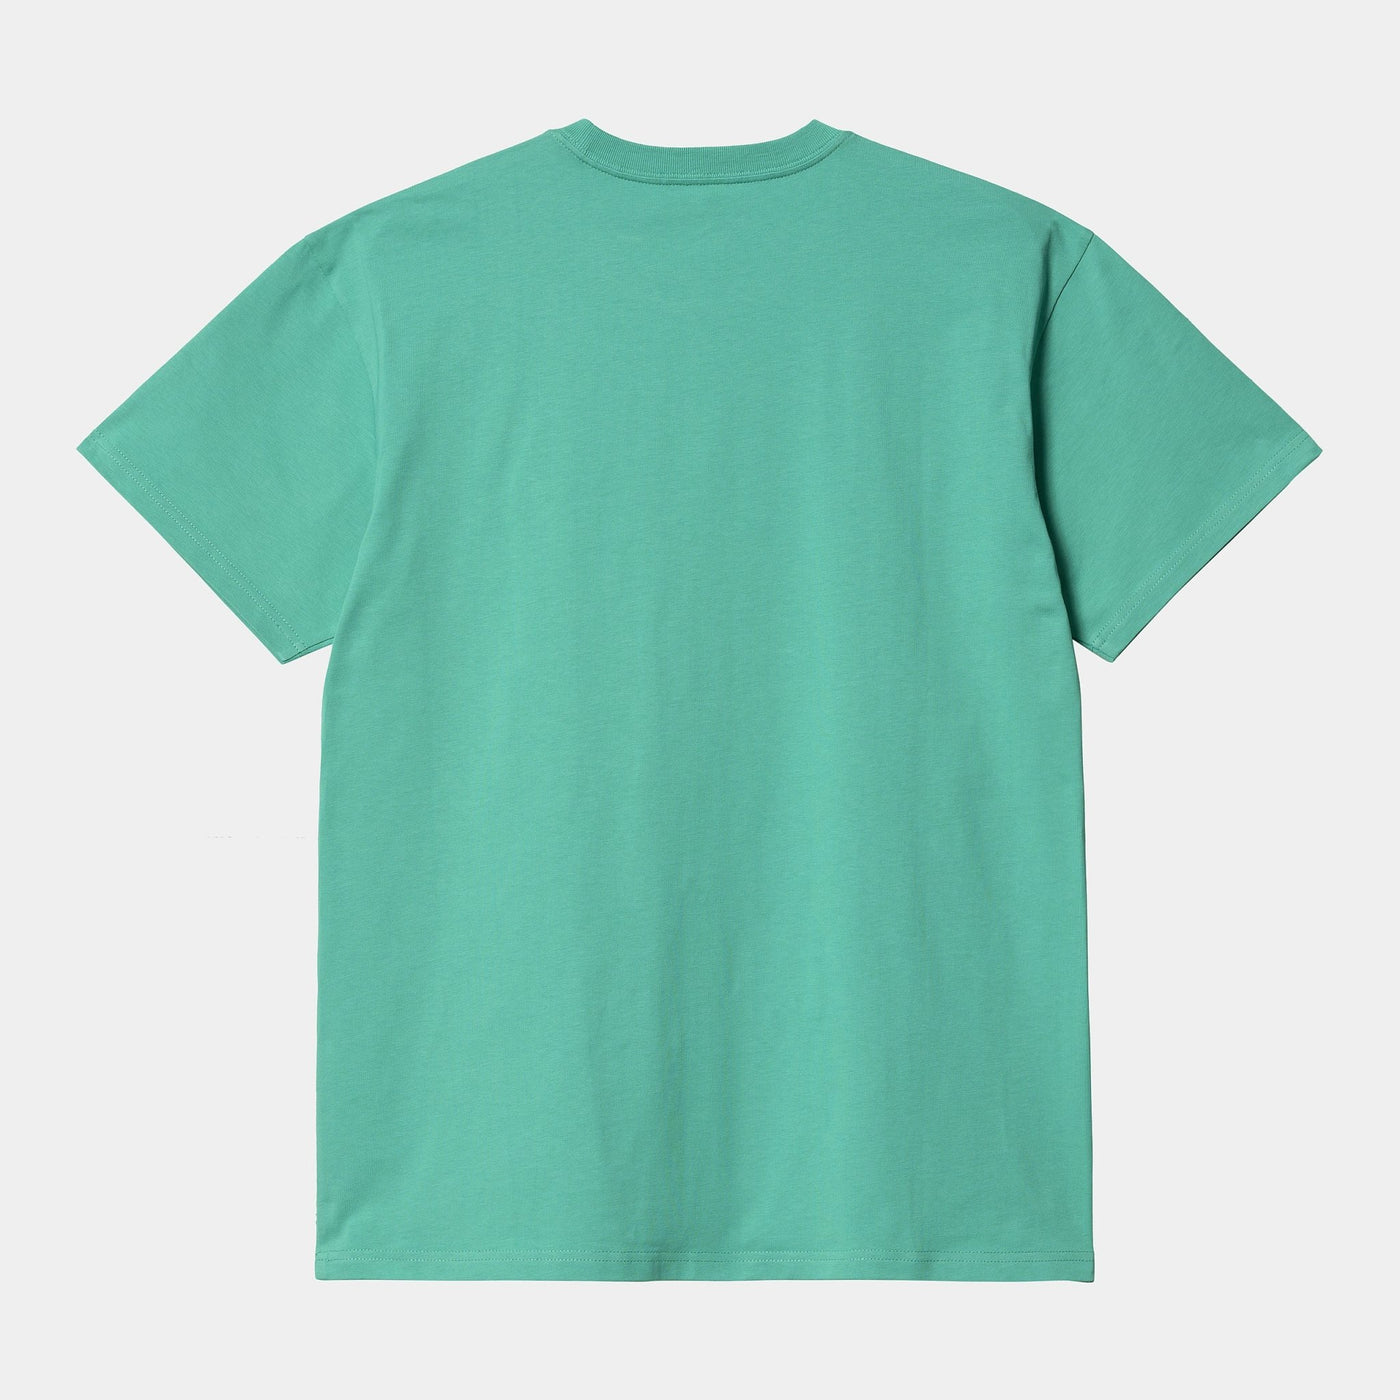 Carhartt WIP - S/S Chase T-Shirt Aqua green Gold - Lothaire